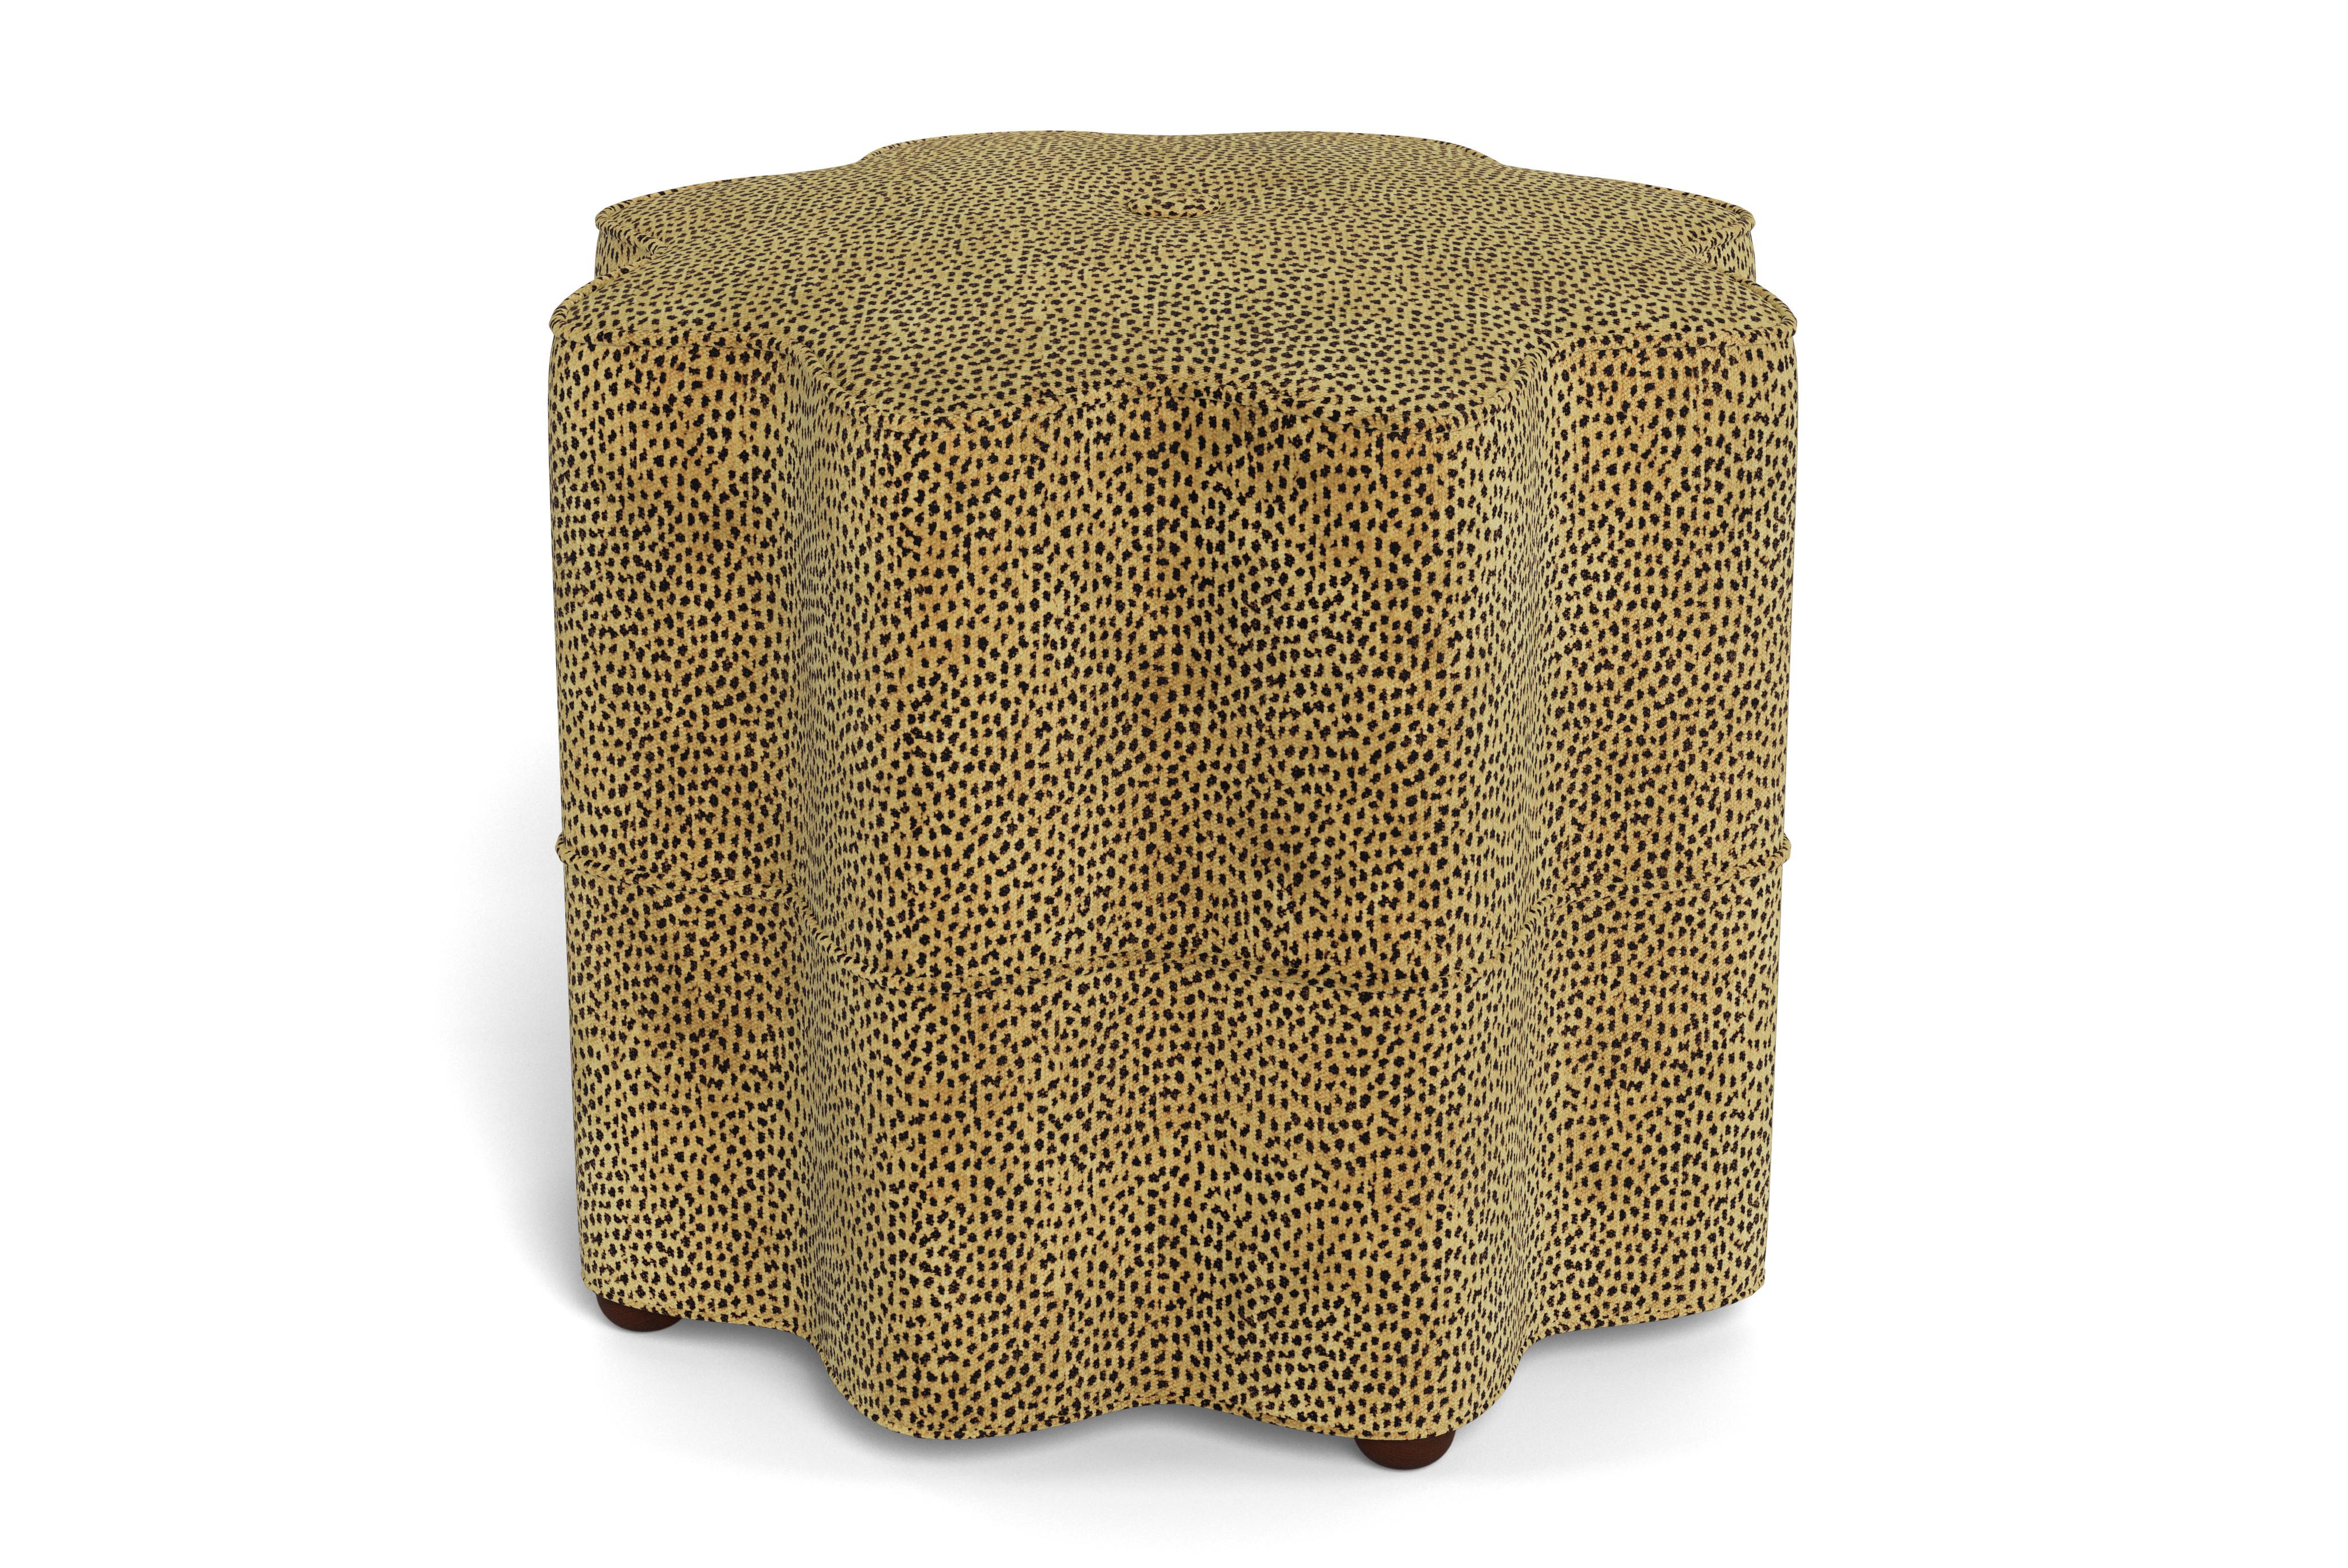 Stools are a brilliant way to create intimacy in a seating area and our Stella stool, compact and iconic in shape, is a great way to do this. The tight upholstered top, banded base, and center button come together in a laid-back, delicate style. The